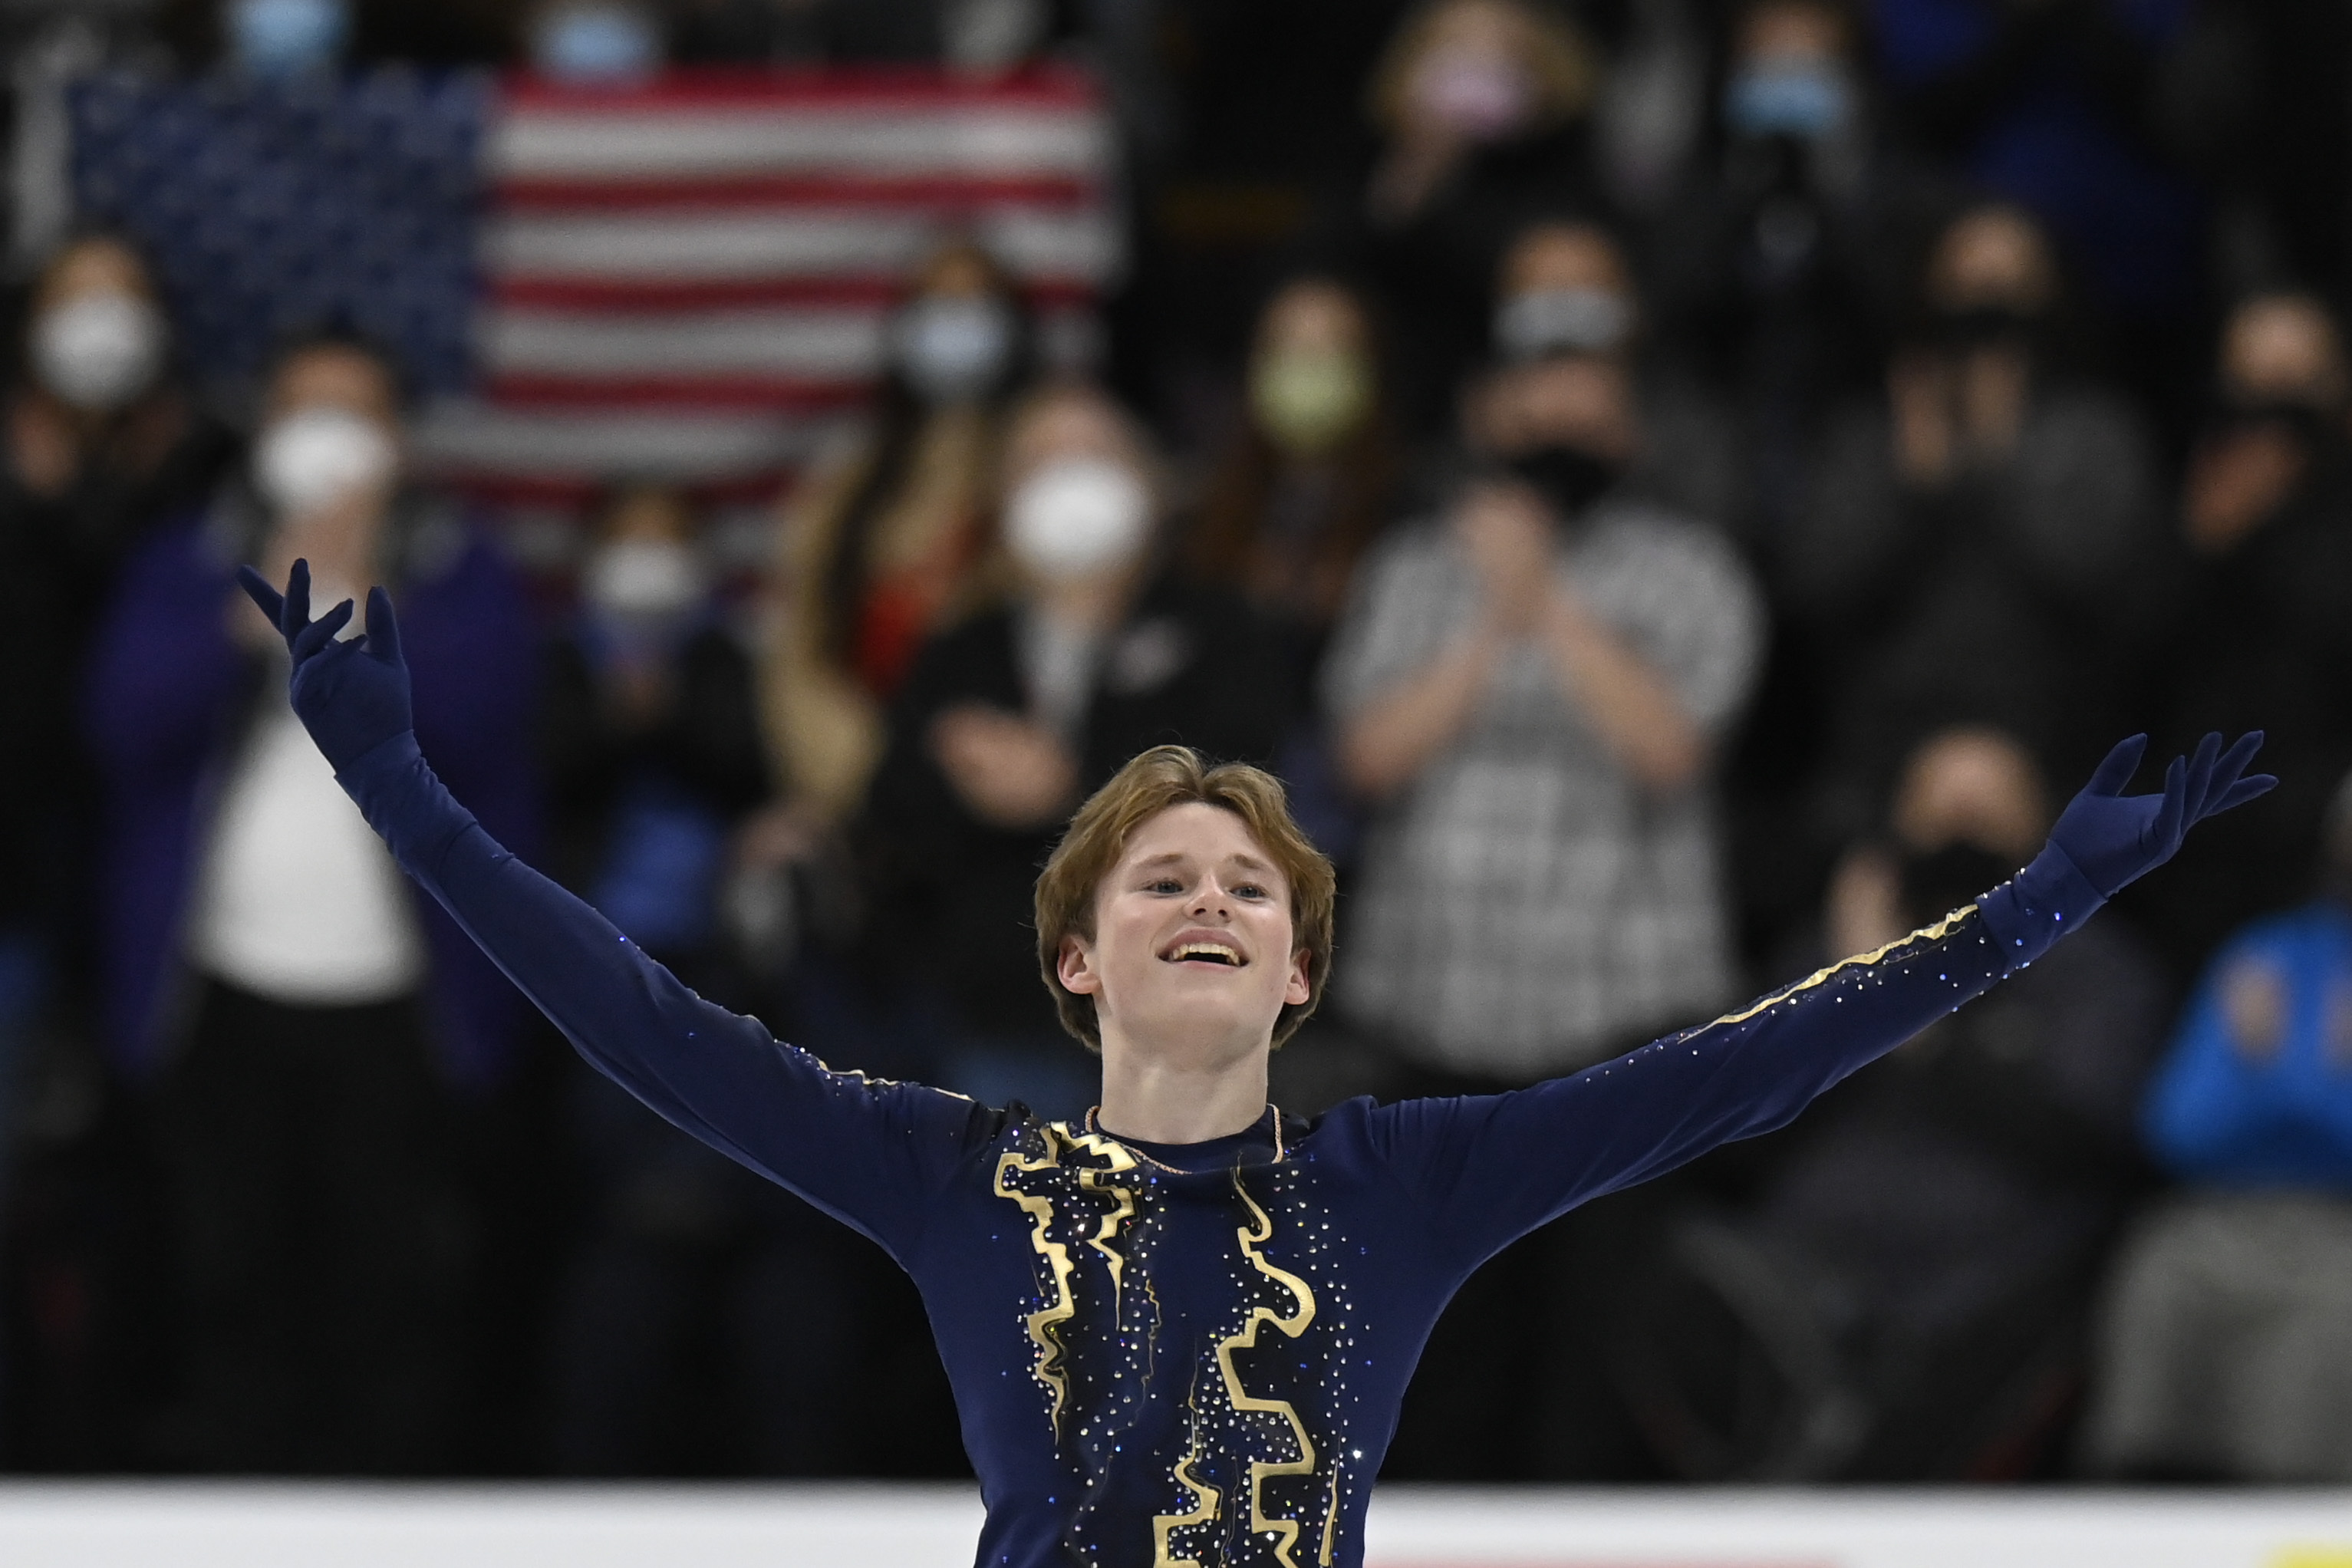 Skate America 2022 Free live stream, TV schedule, how to watch figure skating